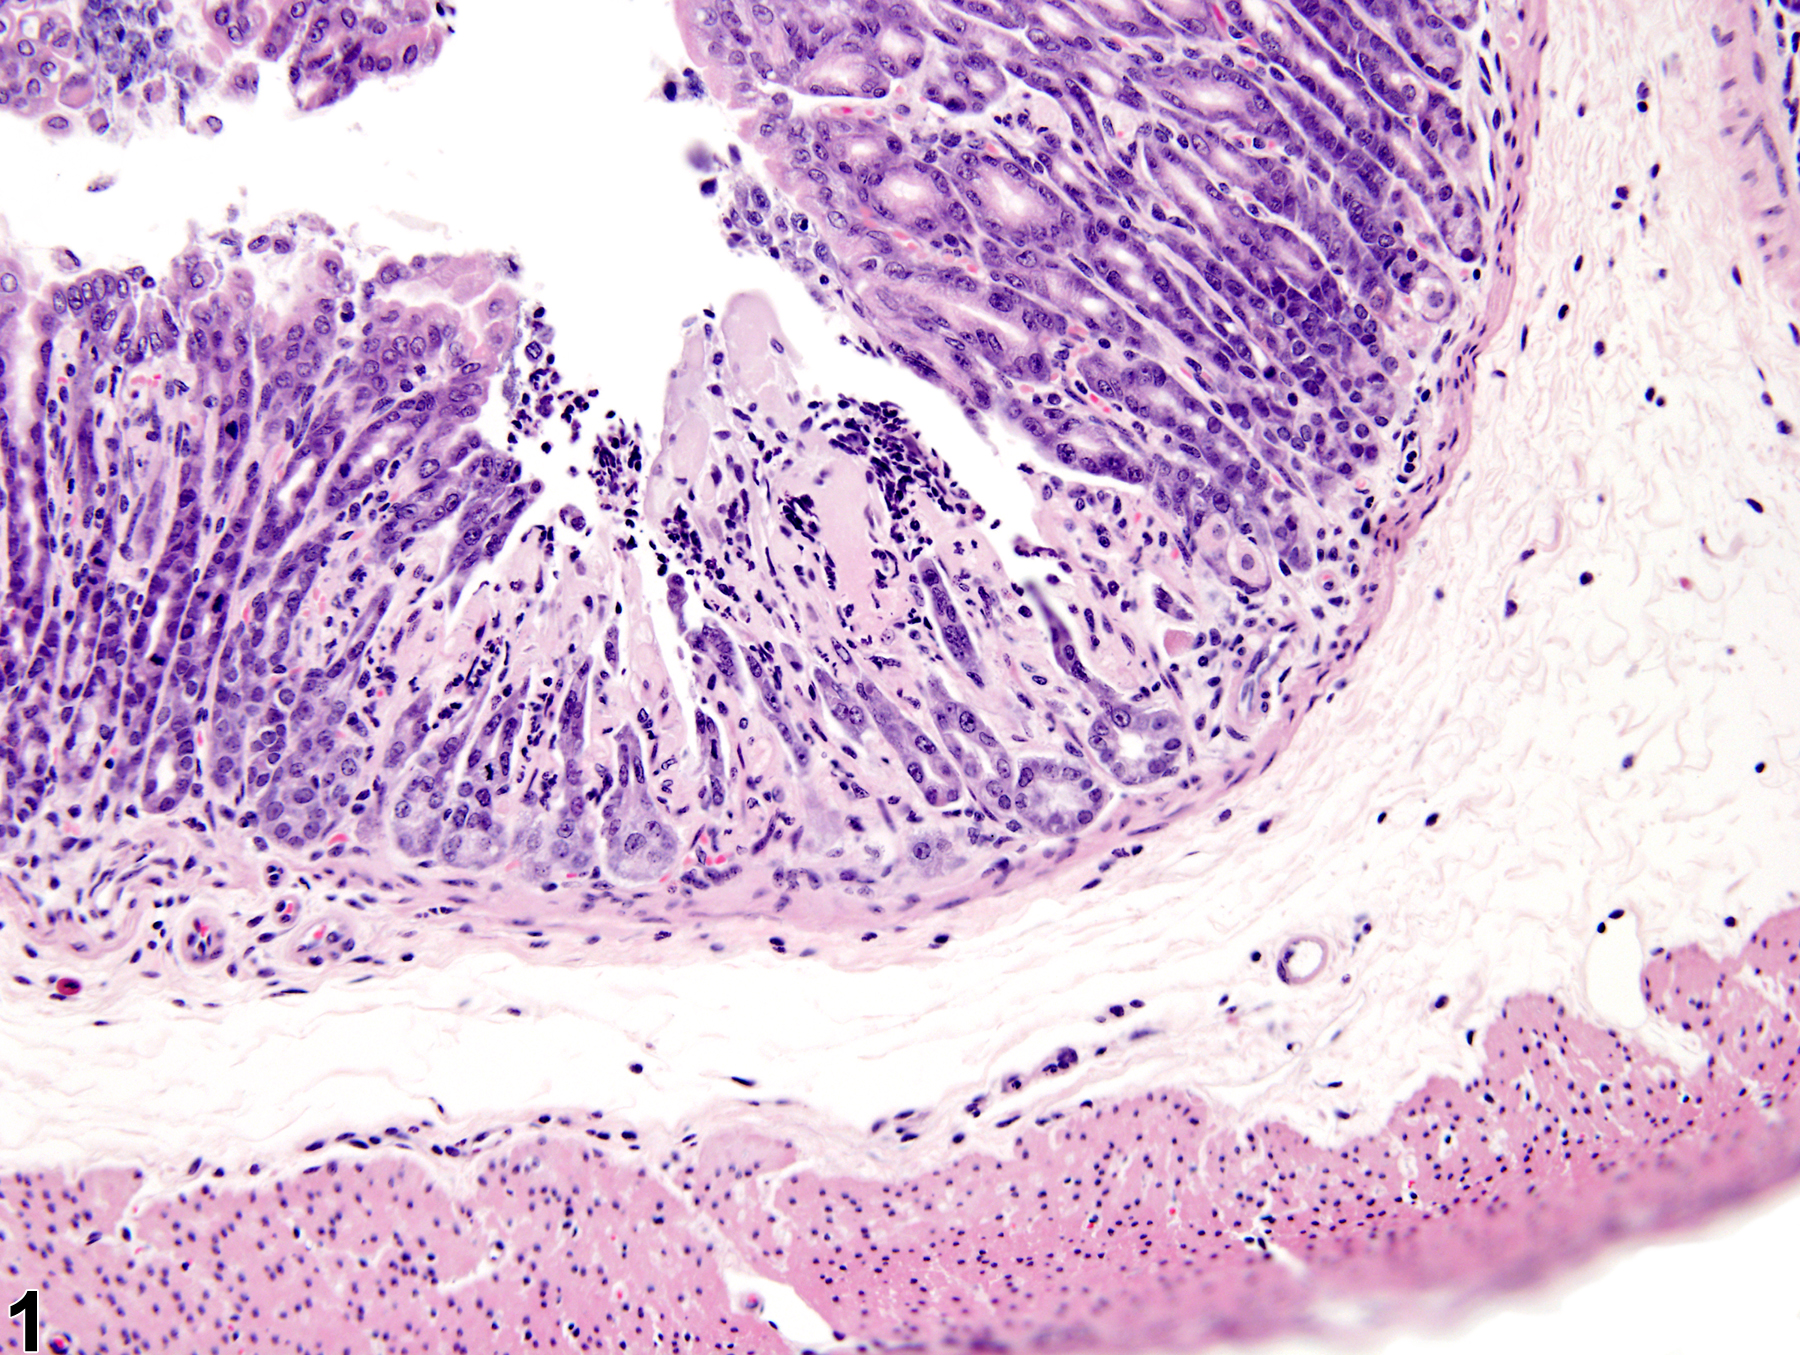 Image of erosion in the glandular stomach from a male B6C3F1 mouse in a subchronic study